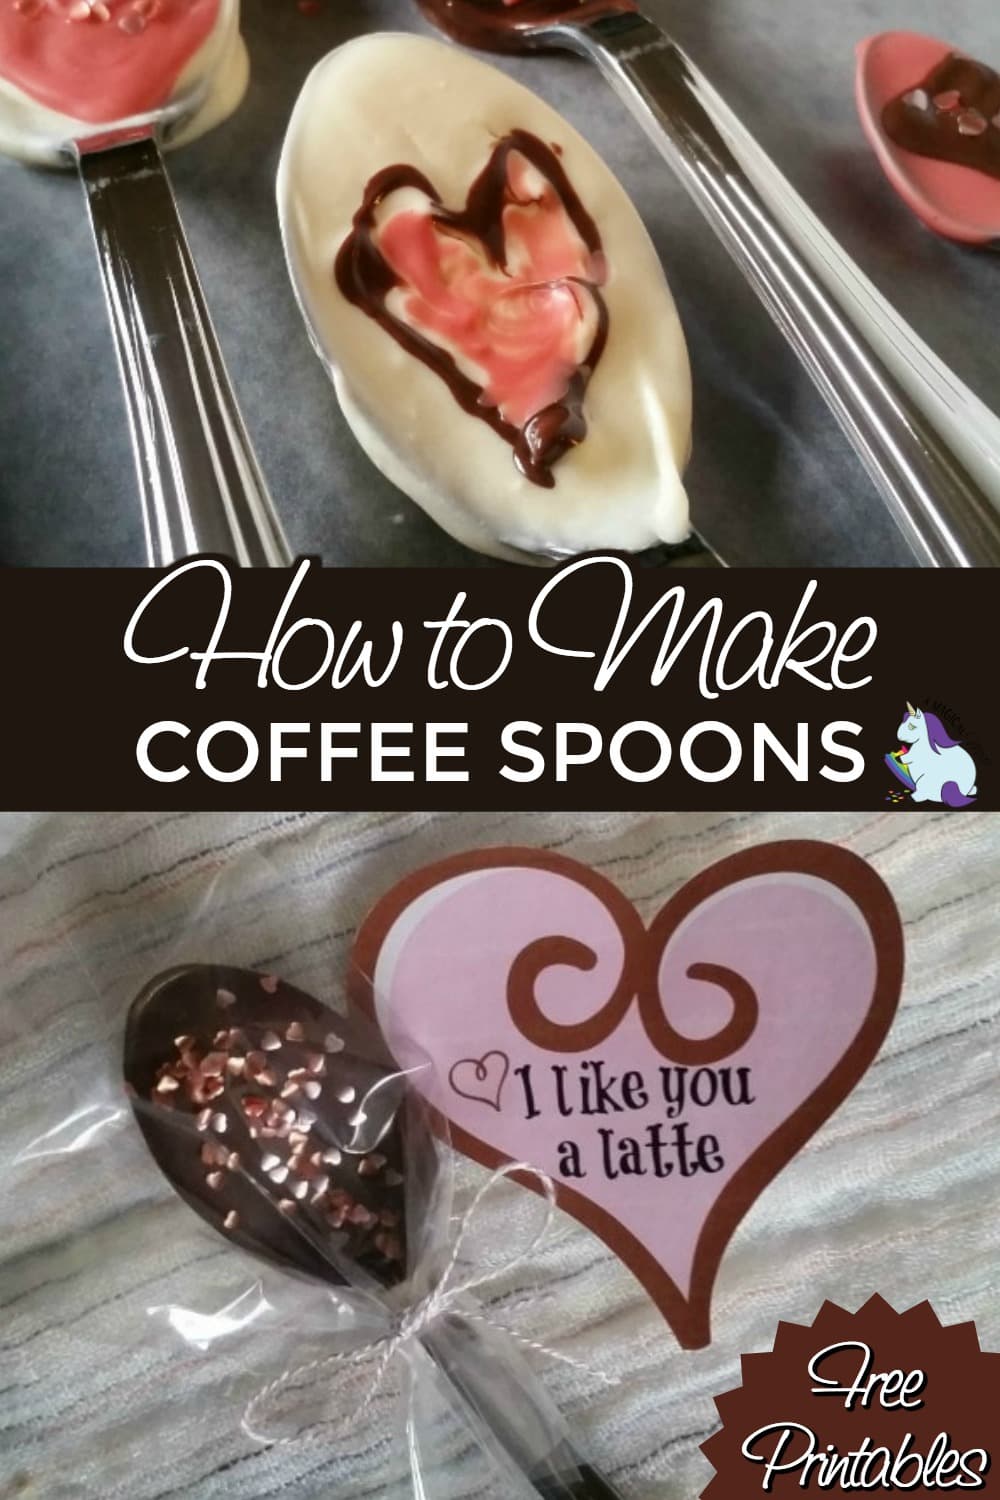 Chocolate covered coffee spoons with Valentine's day tags